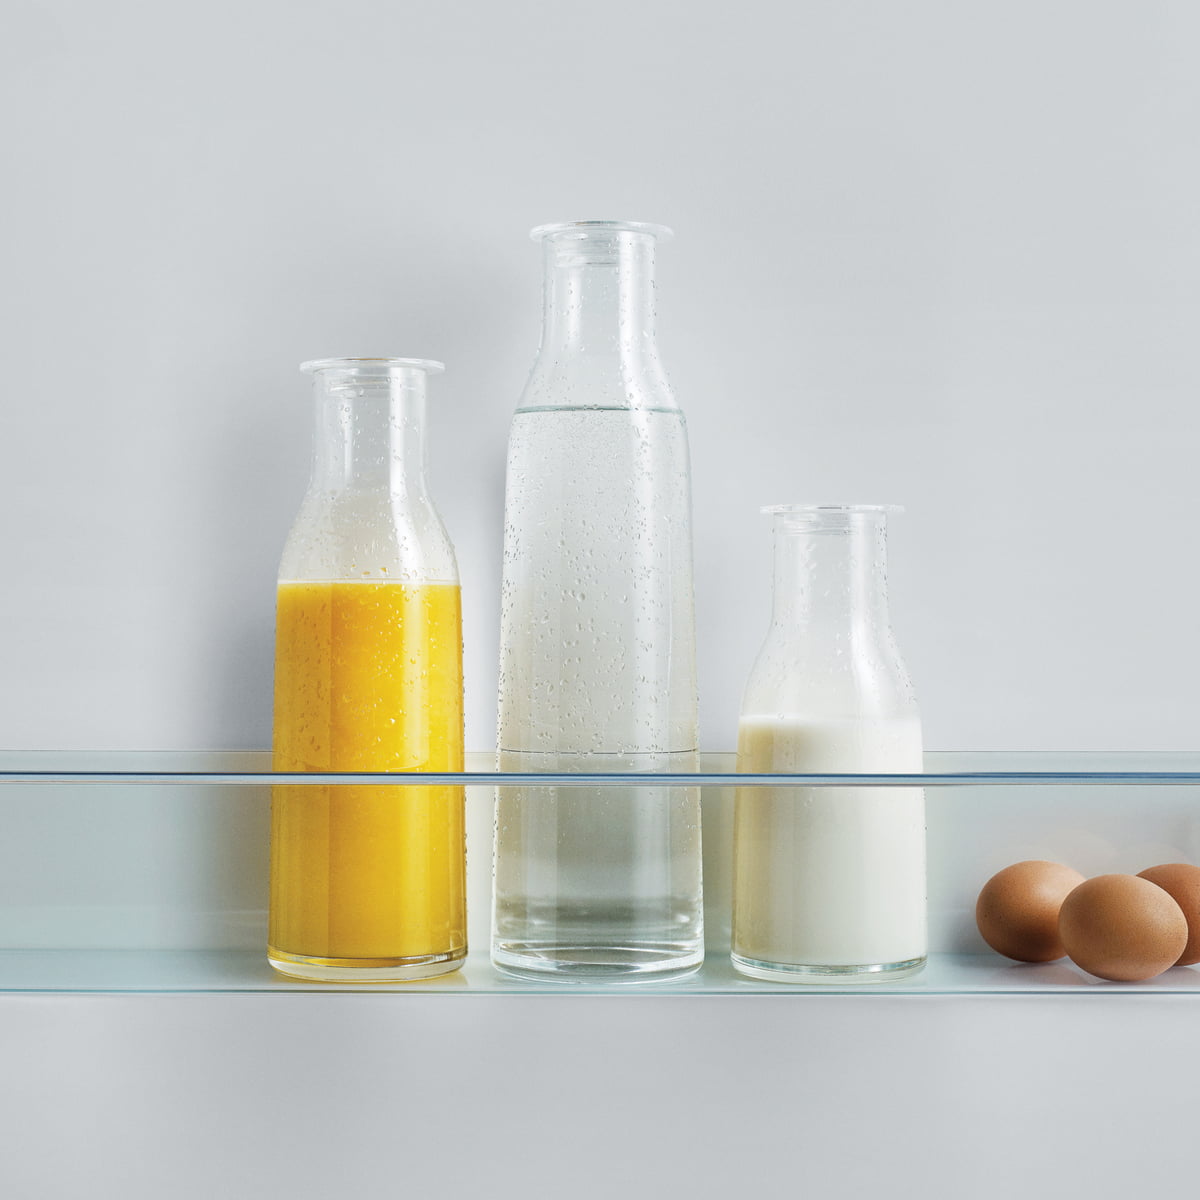 Cecilie Manz: Minima Decanter with Lid